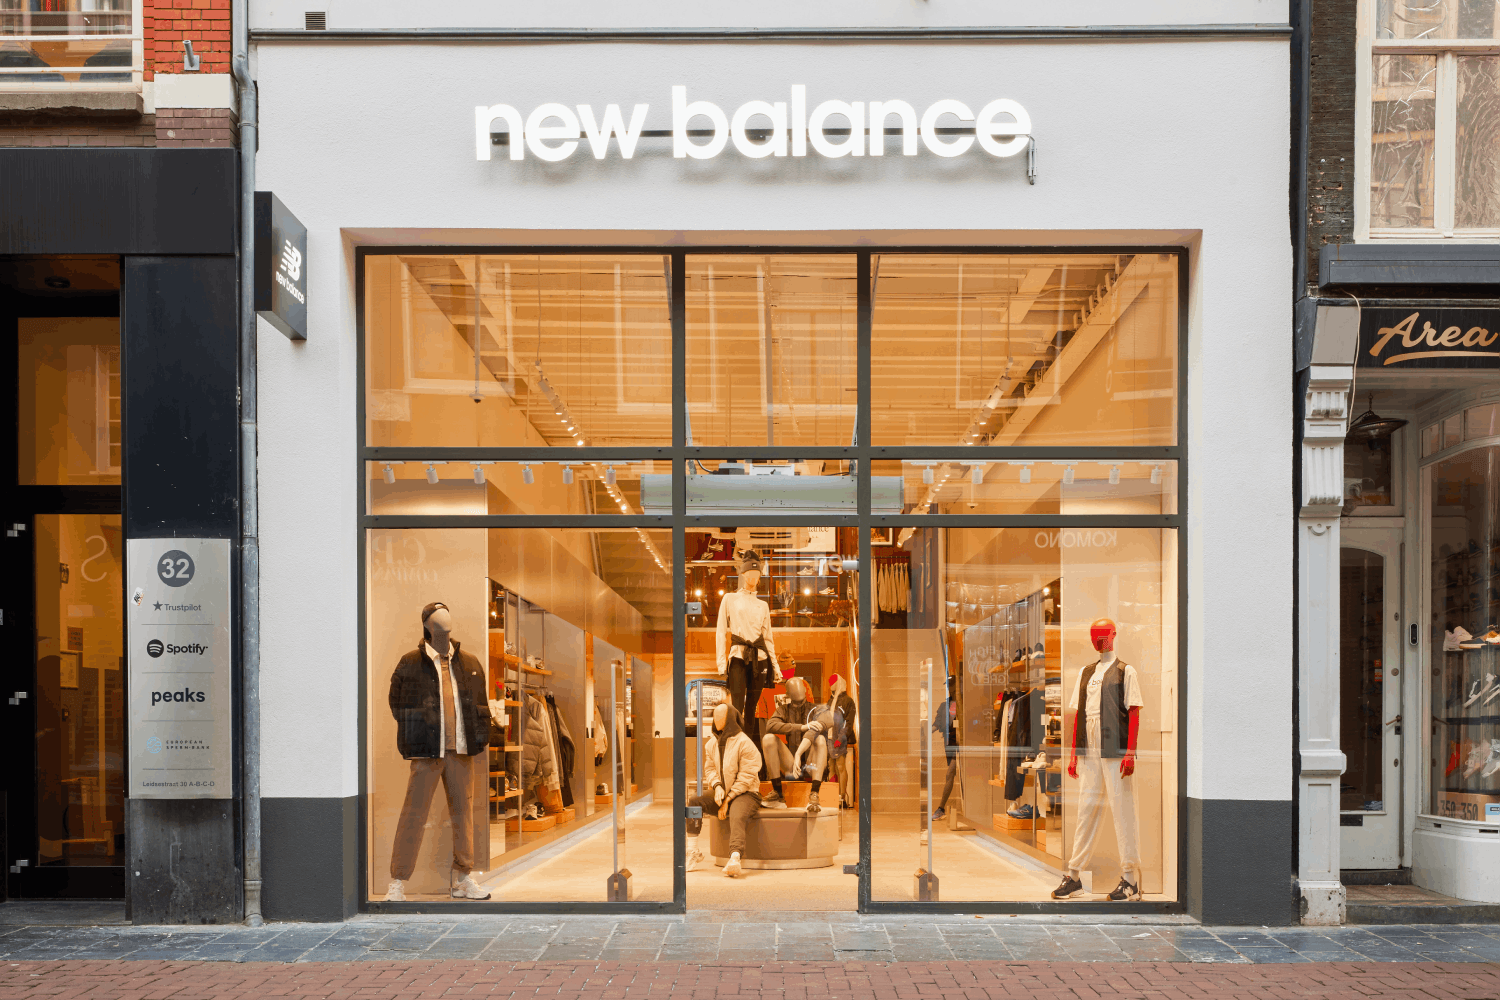 De New Balance Store in Amsterdam heropend na verbouwing